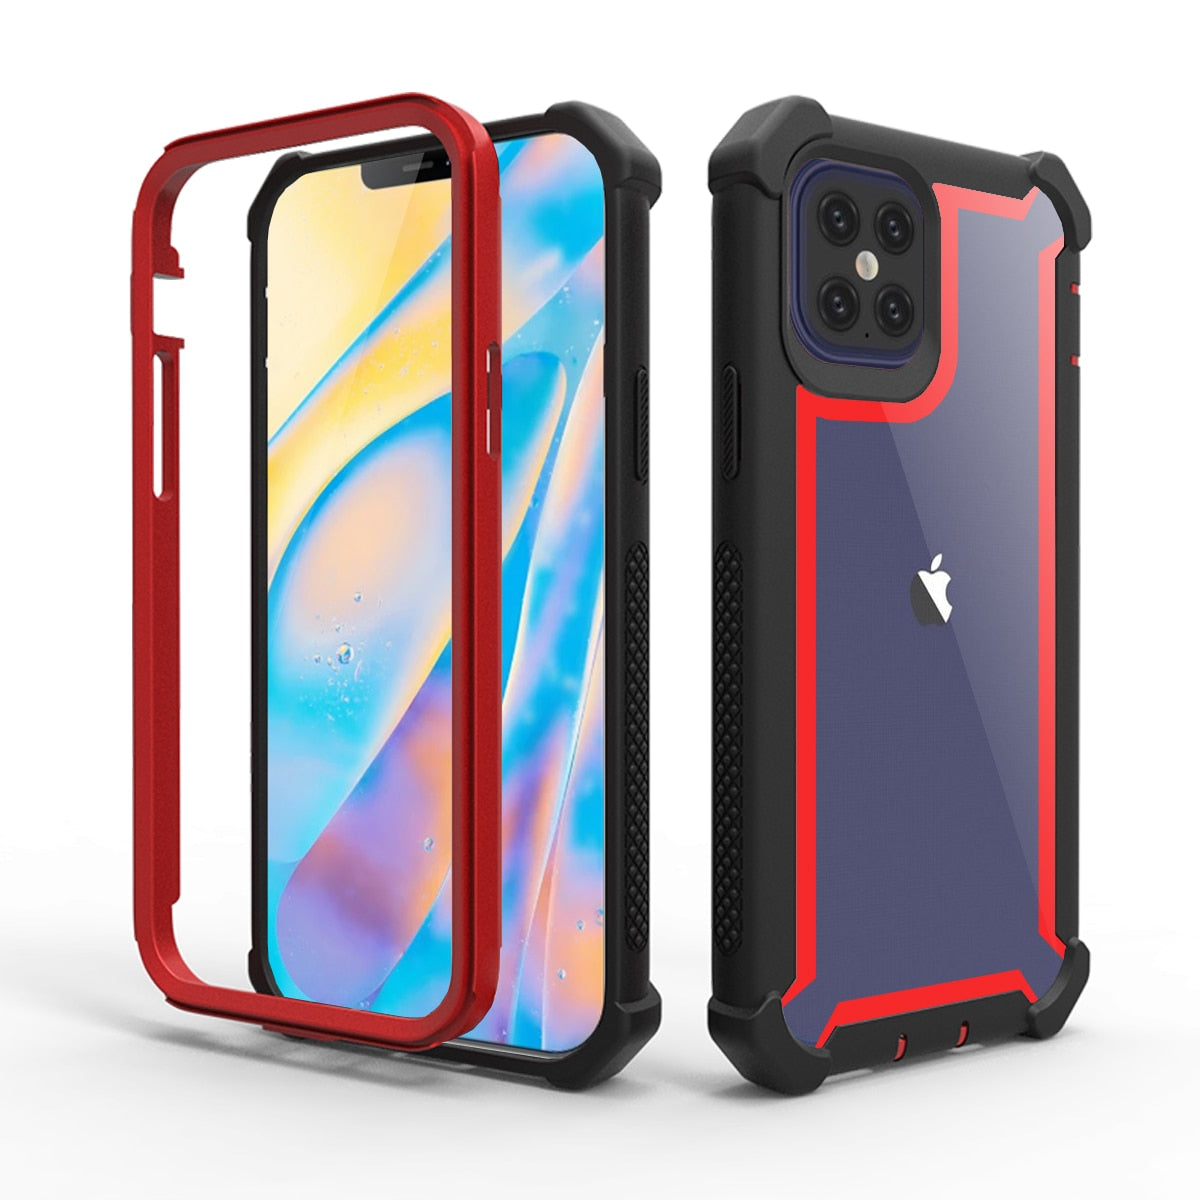 Case for iPhone 12 Pro Max Shockproof Cover Silicone Clear Back Cover Heavy Duty Protection Doom armor PC+Soft TPU Phone Case - 380230 Find Epic Store